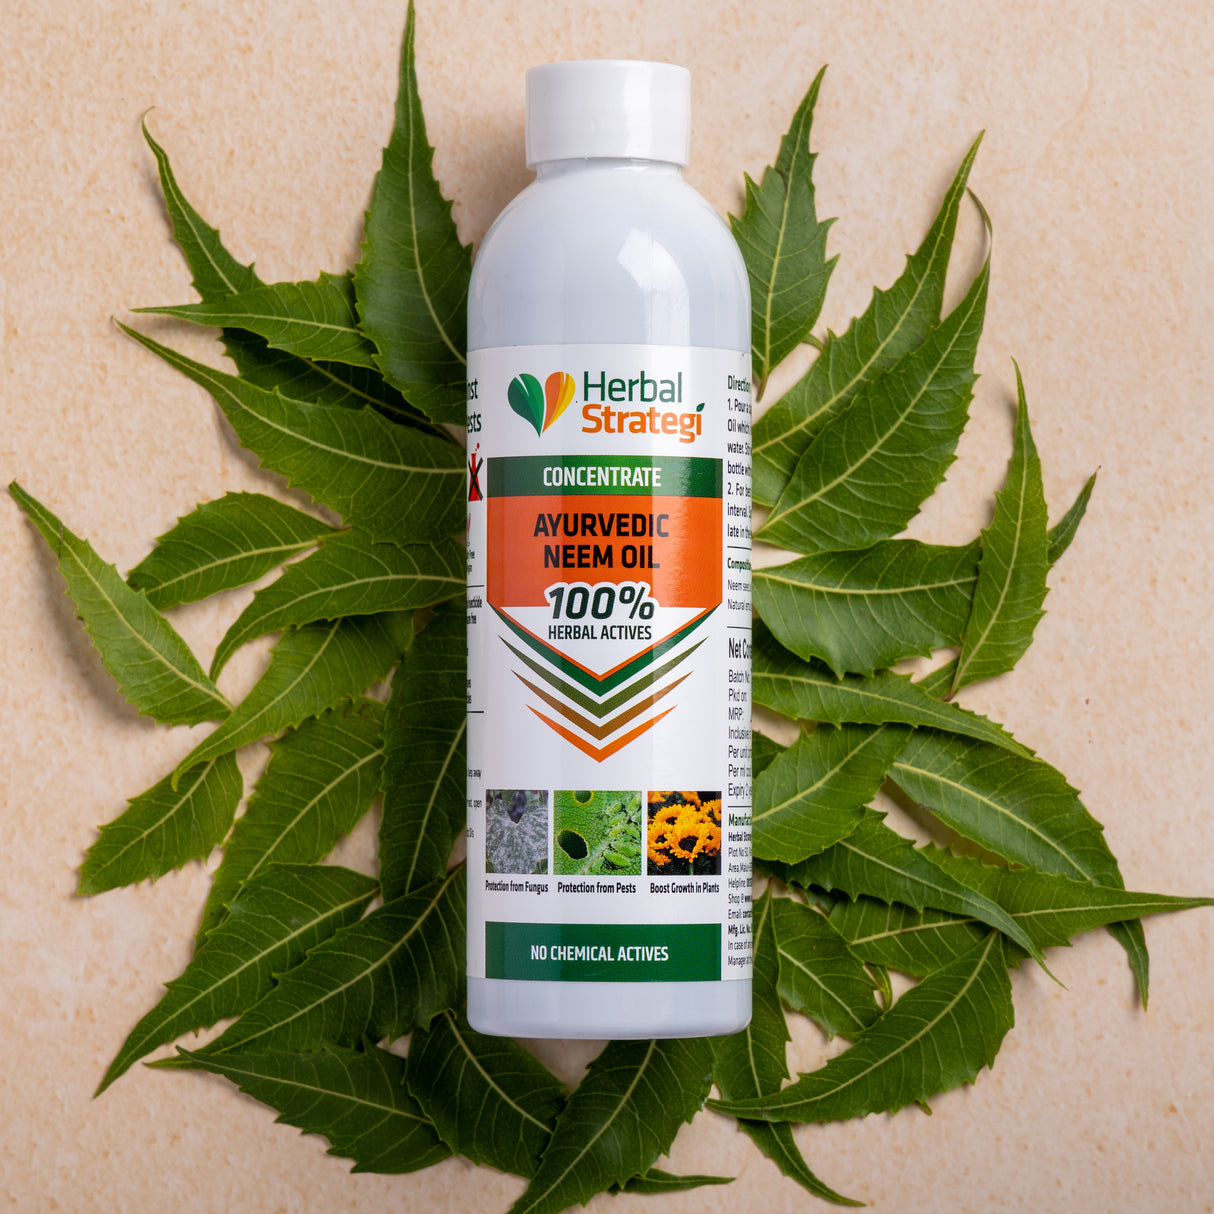 AYURVEDIC NEEM OIL CONCENTRATE